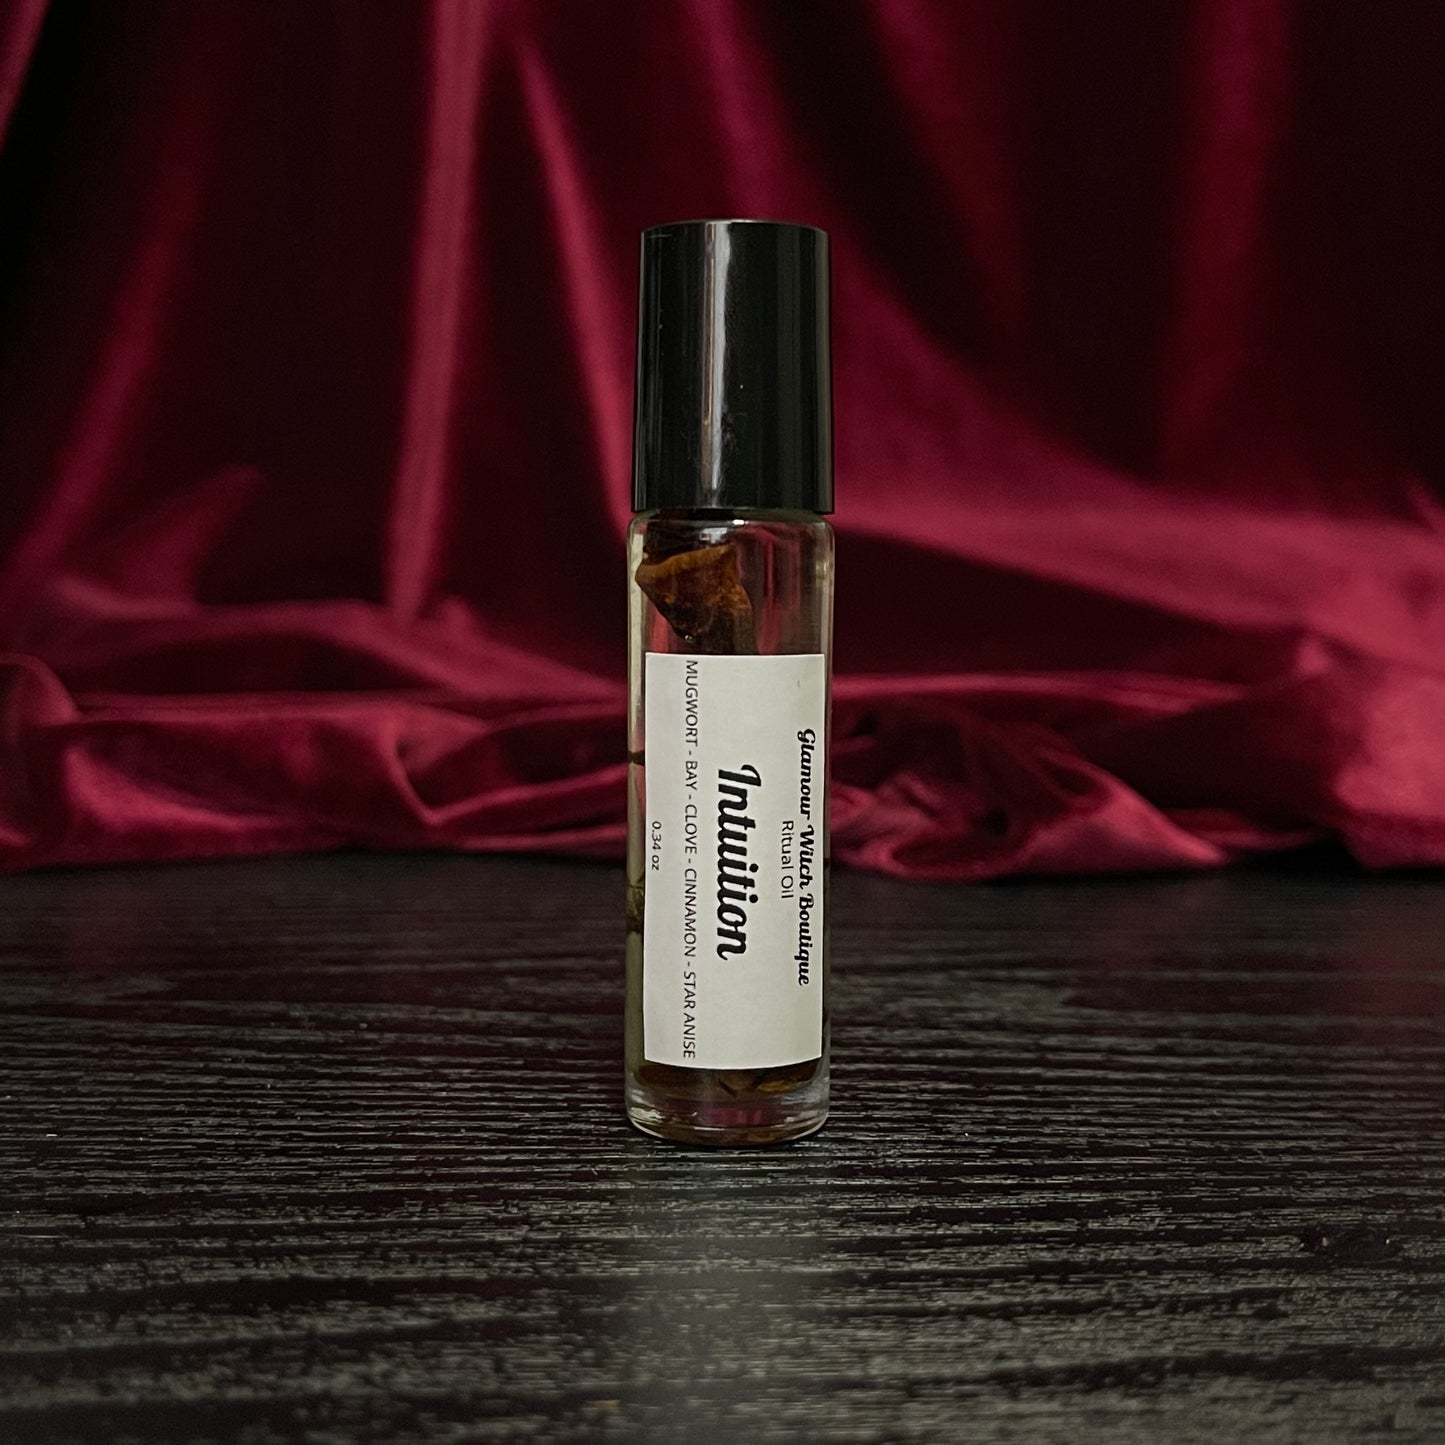 Intuition Ritual Oil